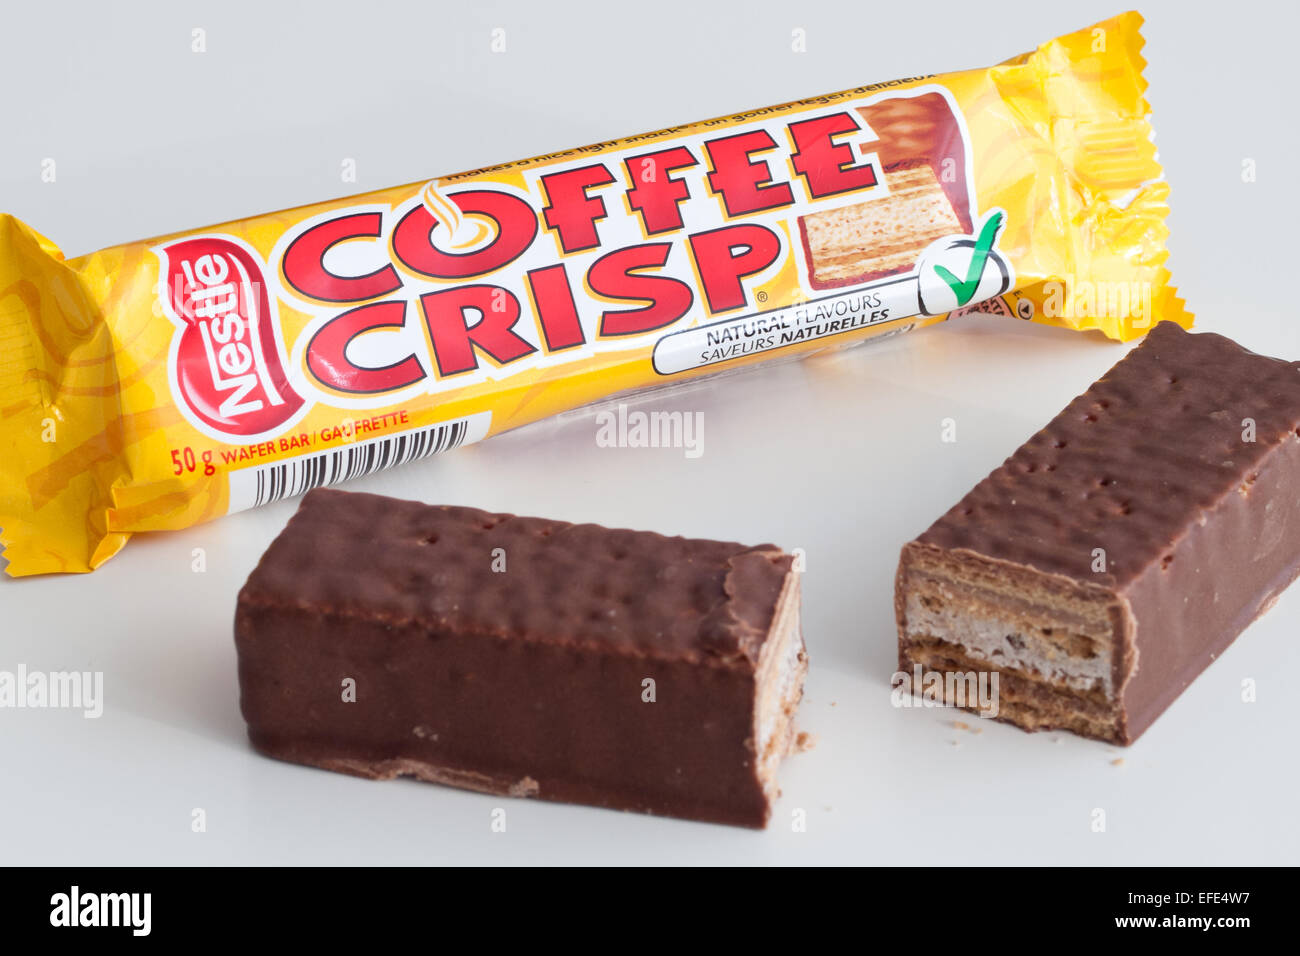 Coffee Crisp, a Canadian chocolate bar currently being produced by Nestlé Canada. Stock Photo